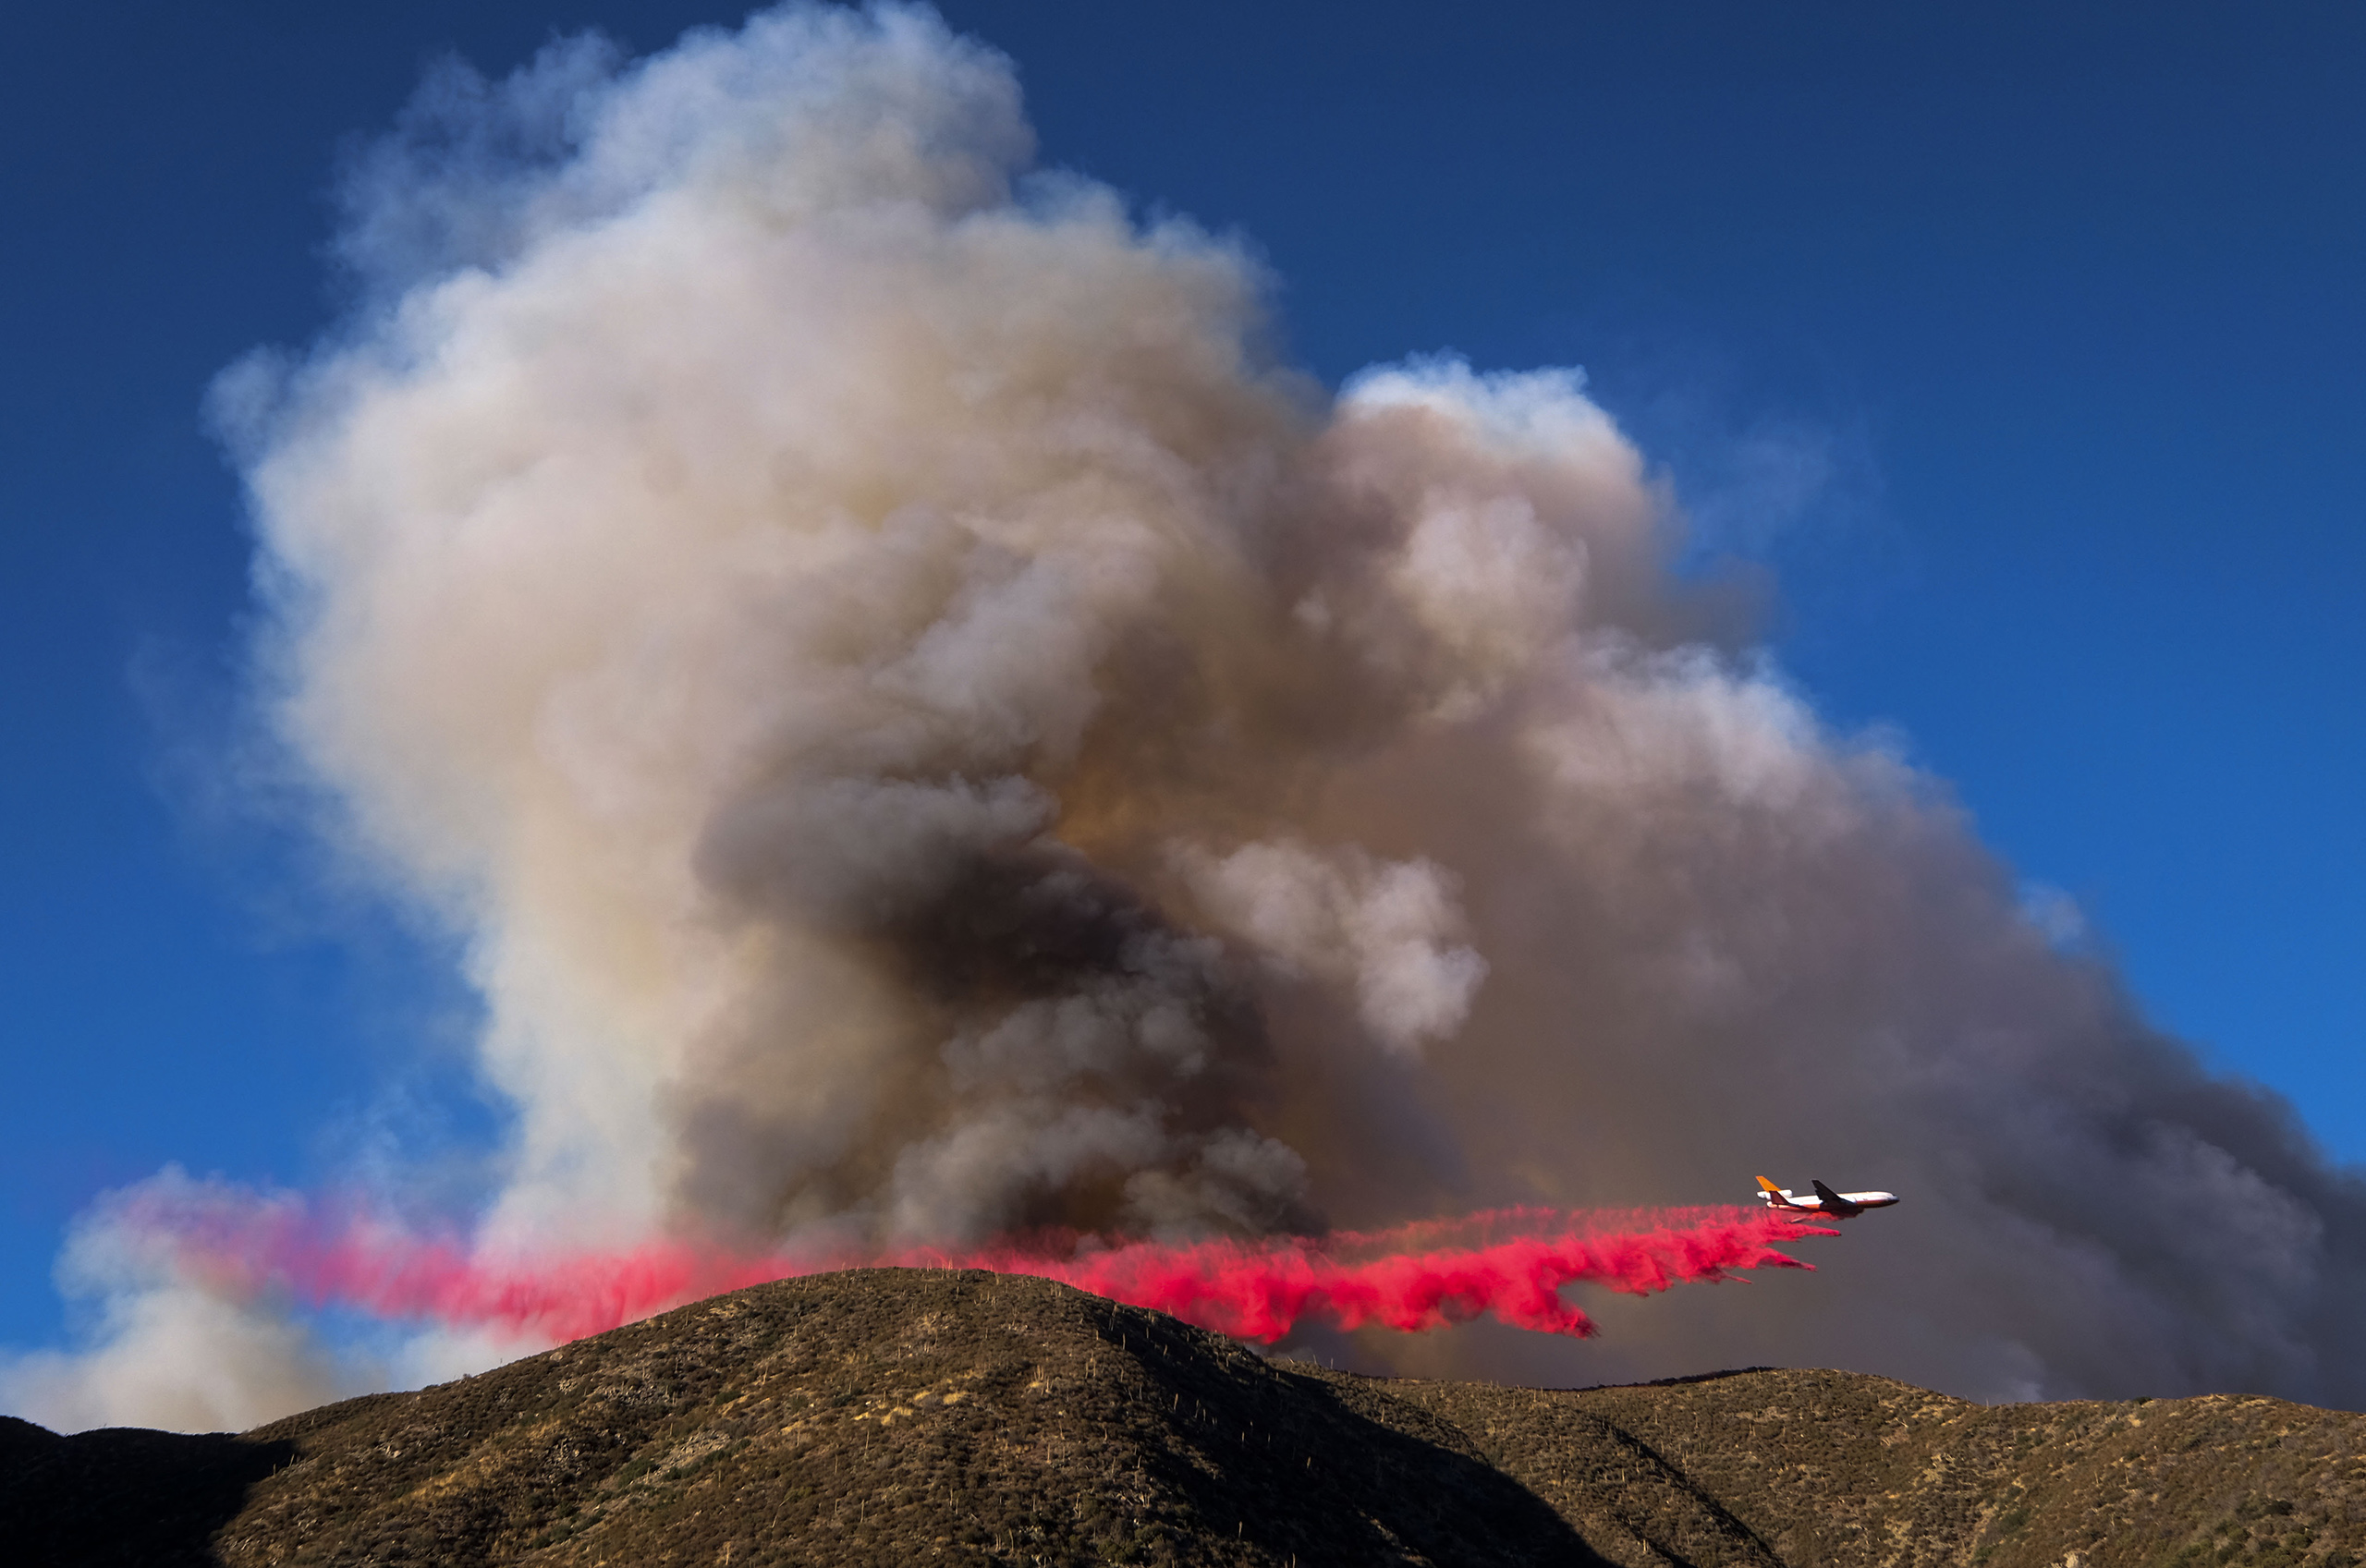 An air tanker drops fire retardant on the Blue Cut wildfire in Lytle Creek, California, Aug. 16, 2016.